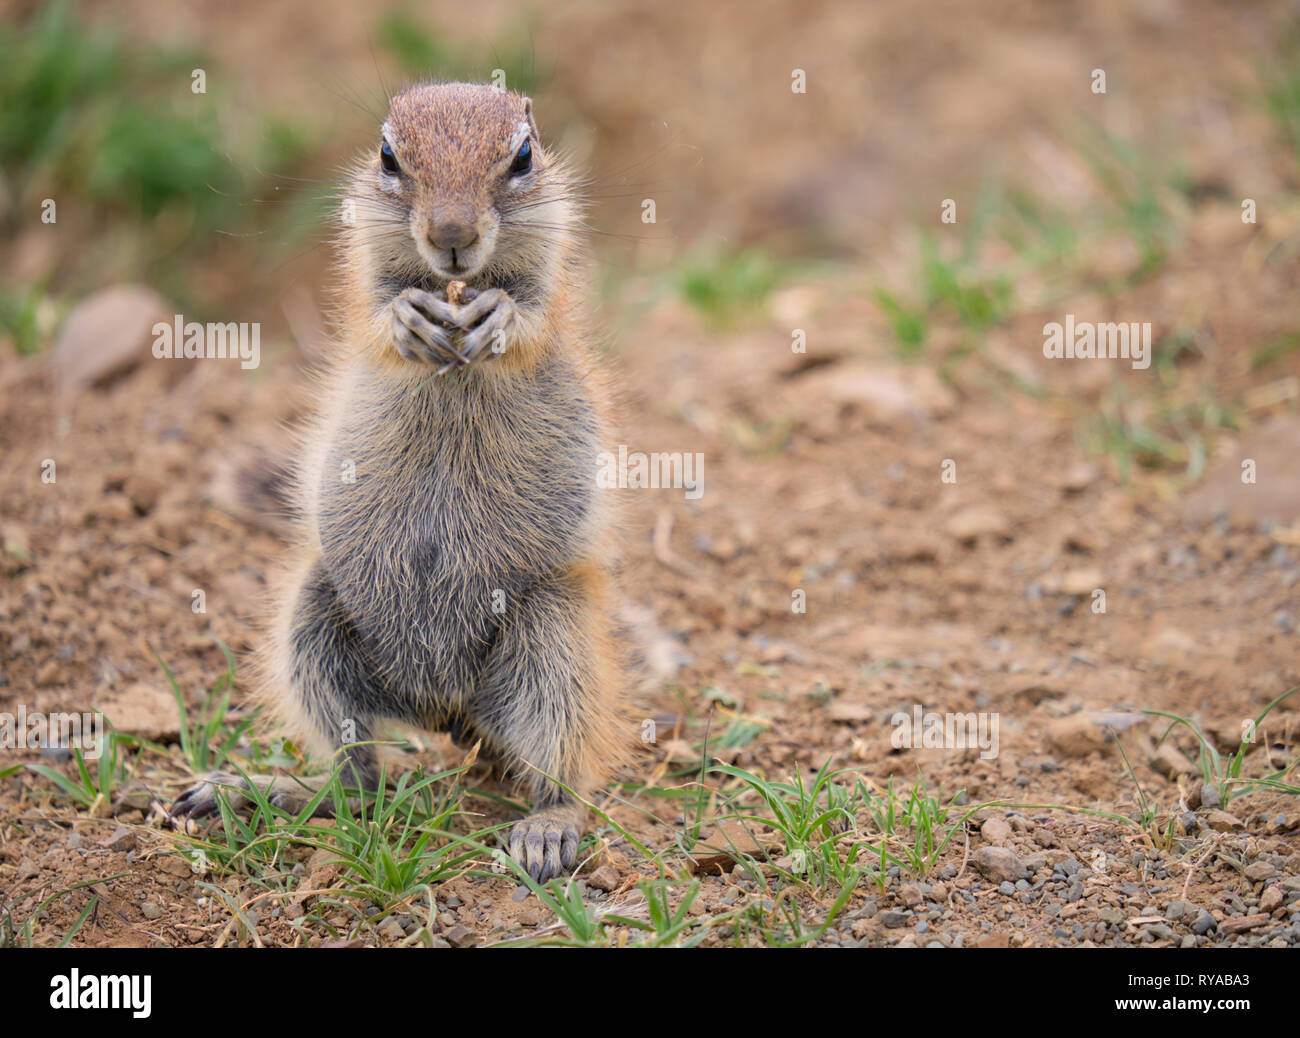 Cape Ground squirrel (Xerus inauris) standing on its hind legs holding a seed in its front claws. Full length portrait on dry arid land Stock Photo